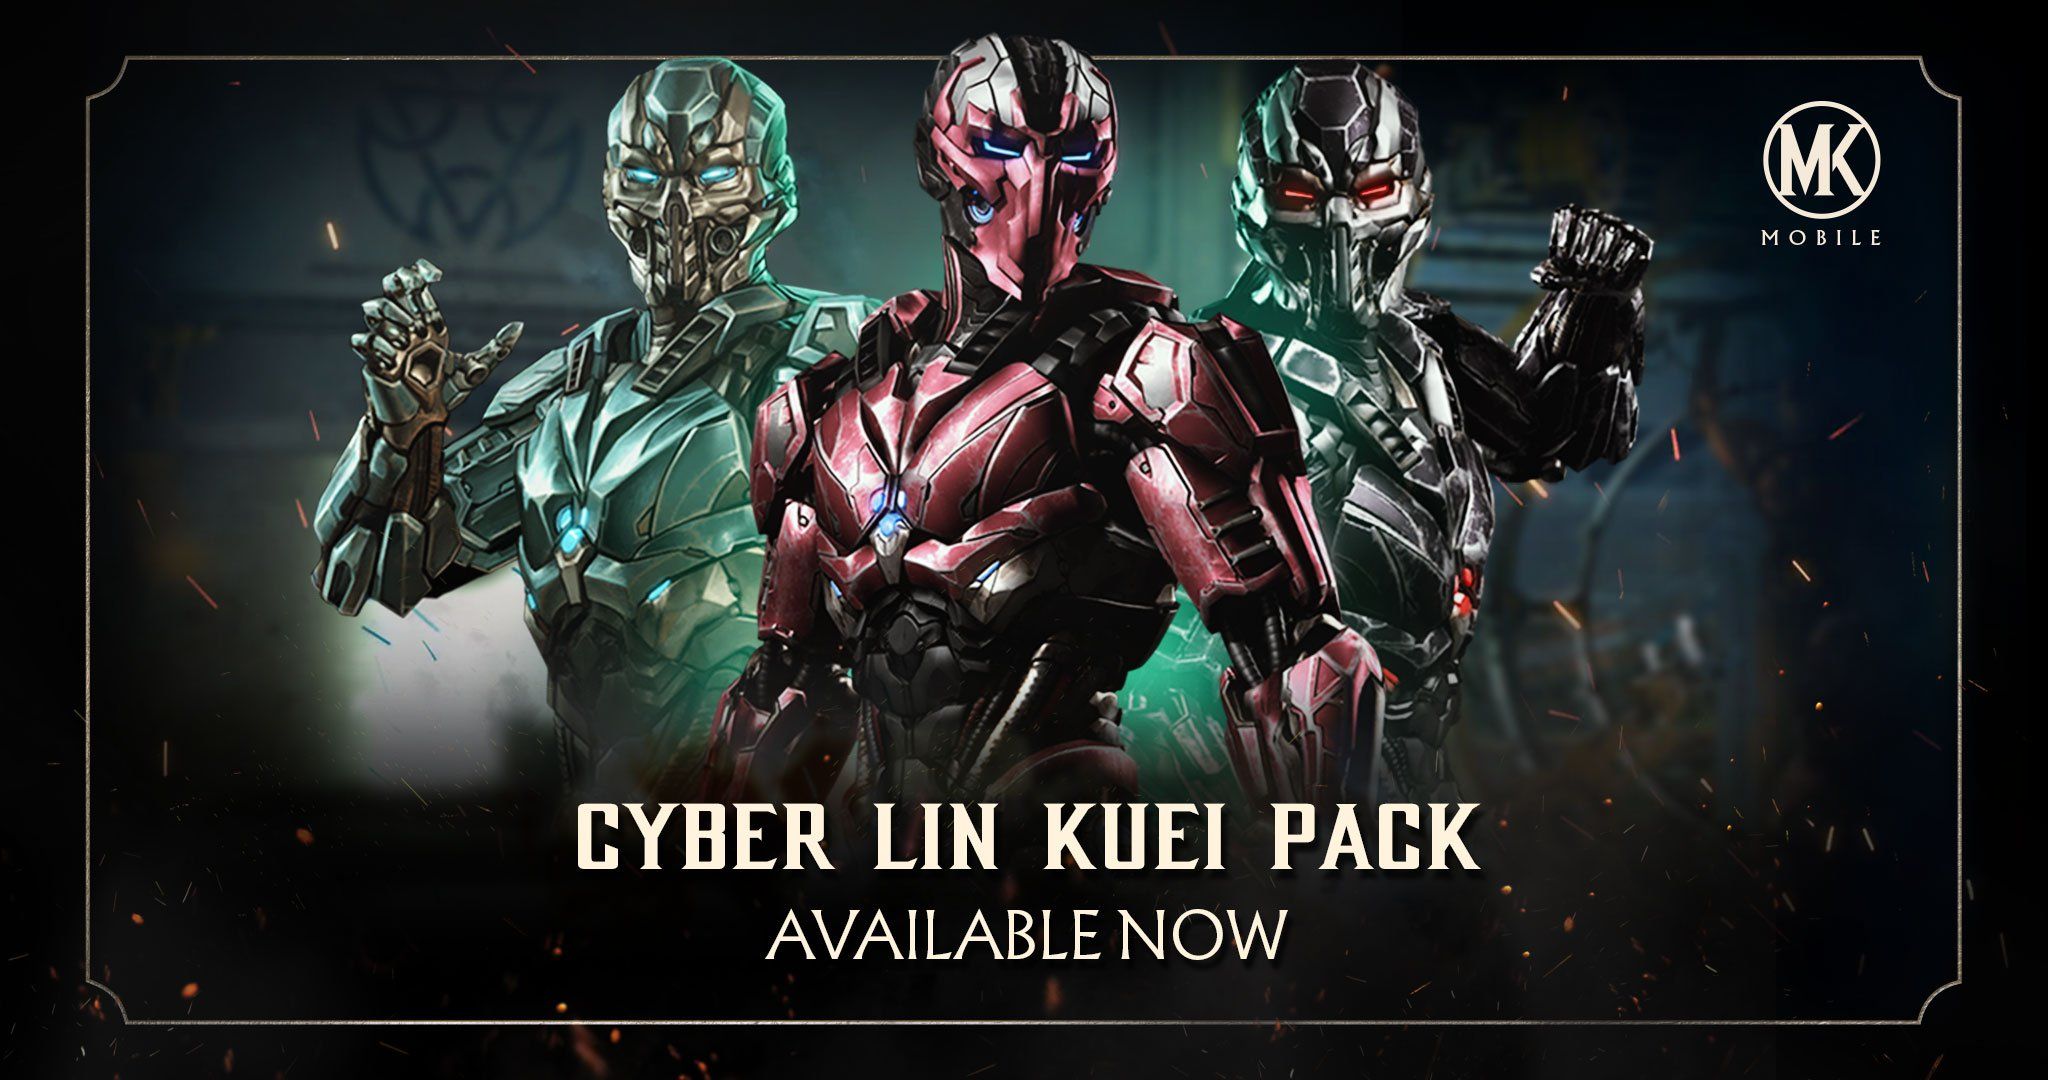 Mortal Kombat Mobile the new Cyber Lin Kuei Pack for a chance to kollect and upgrade the powerful Triborg team! #mkmobile